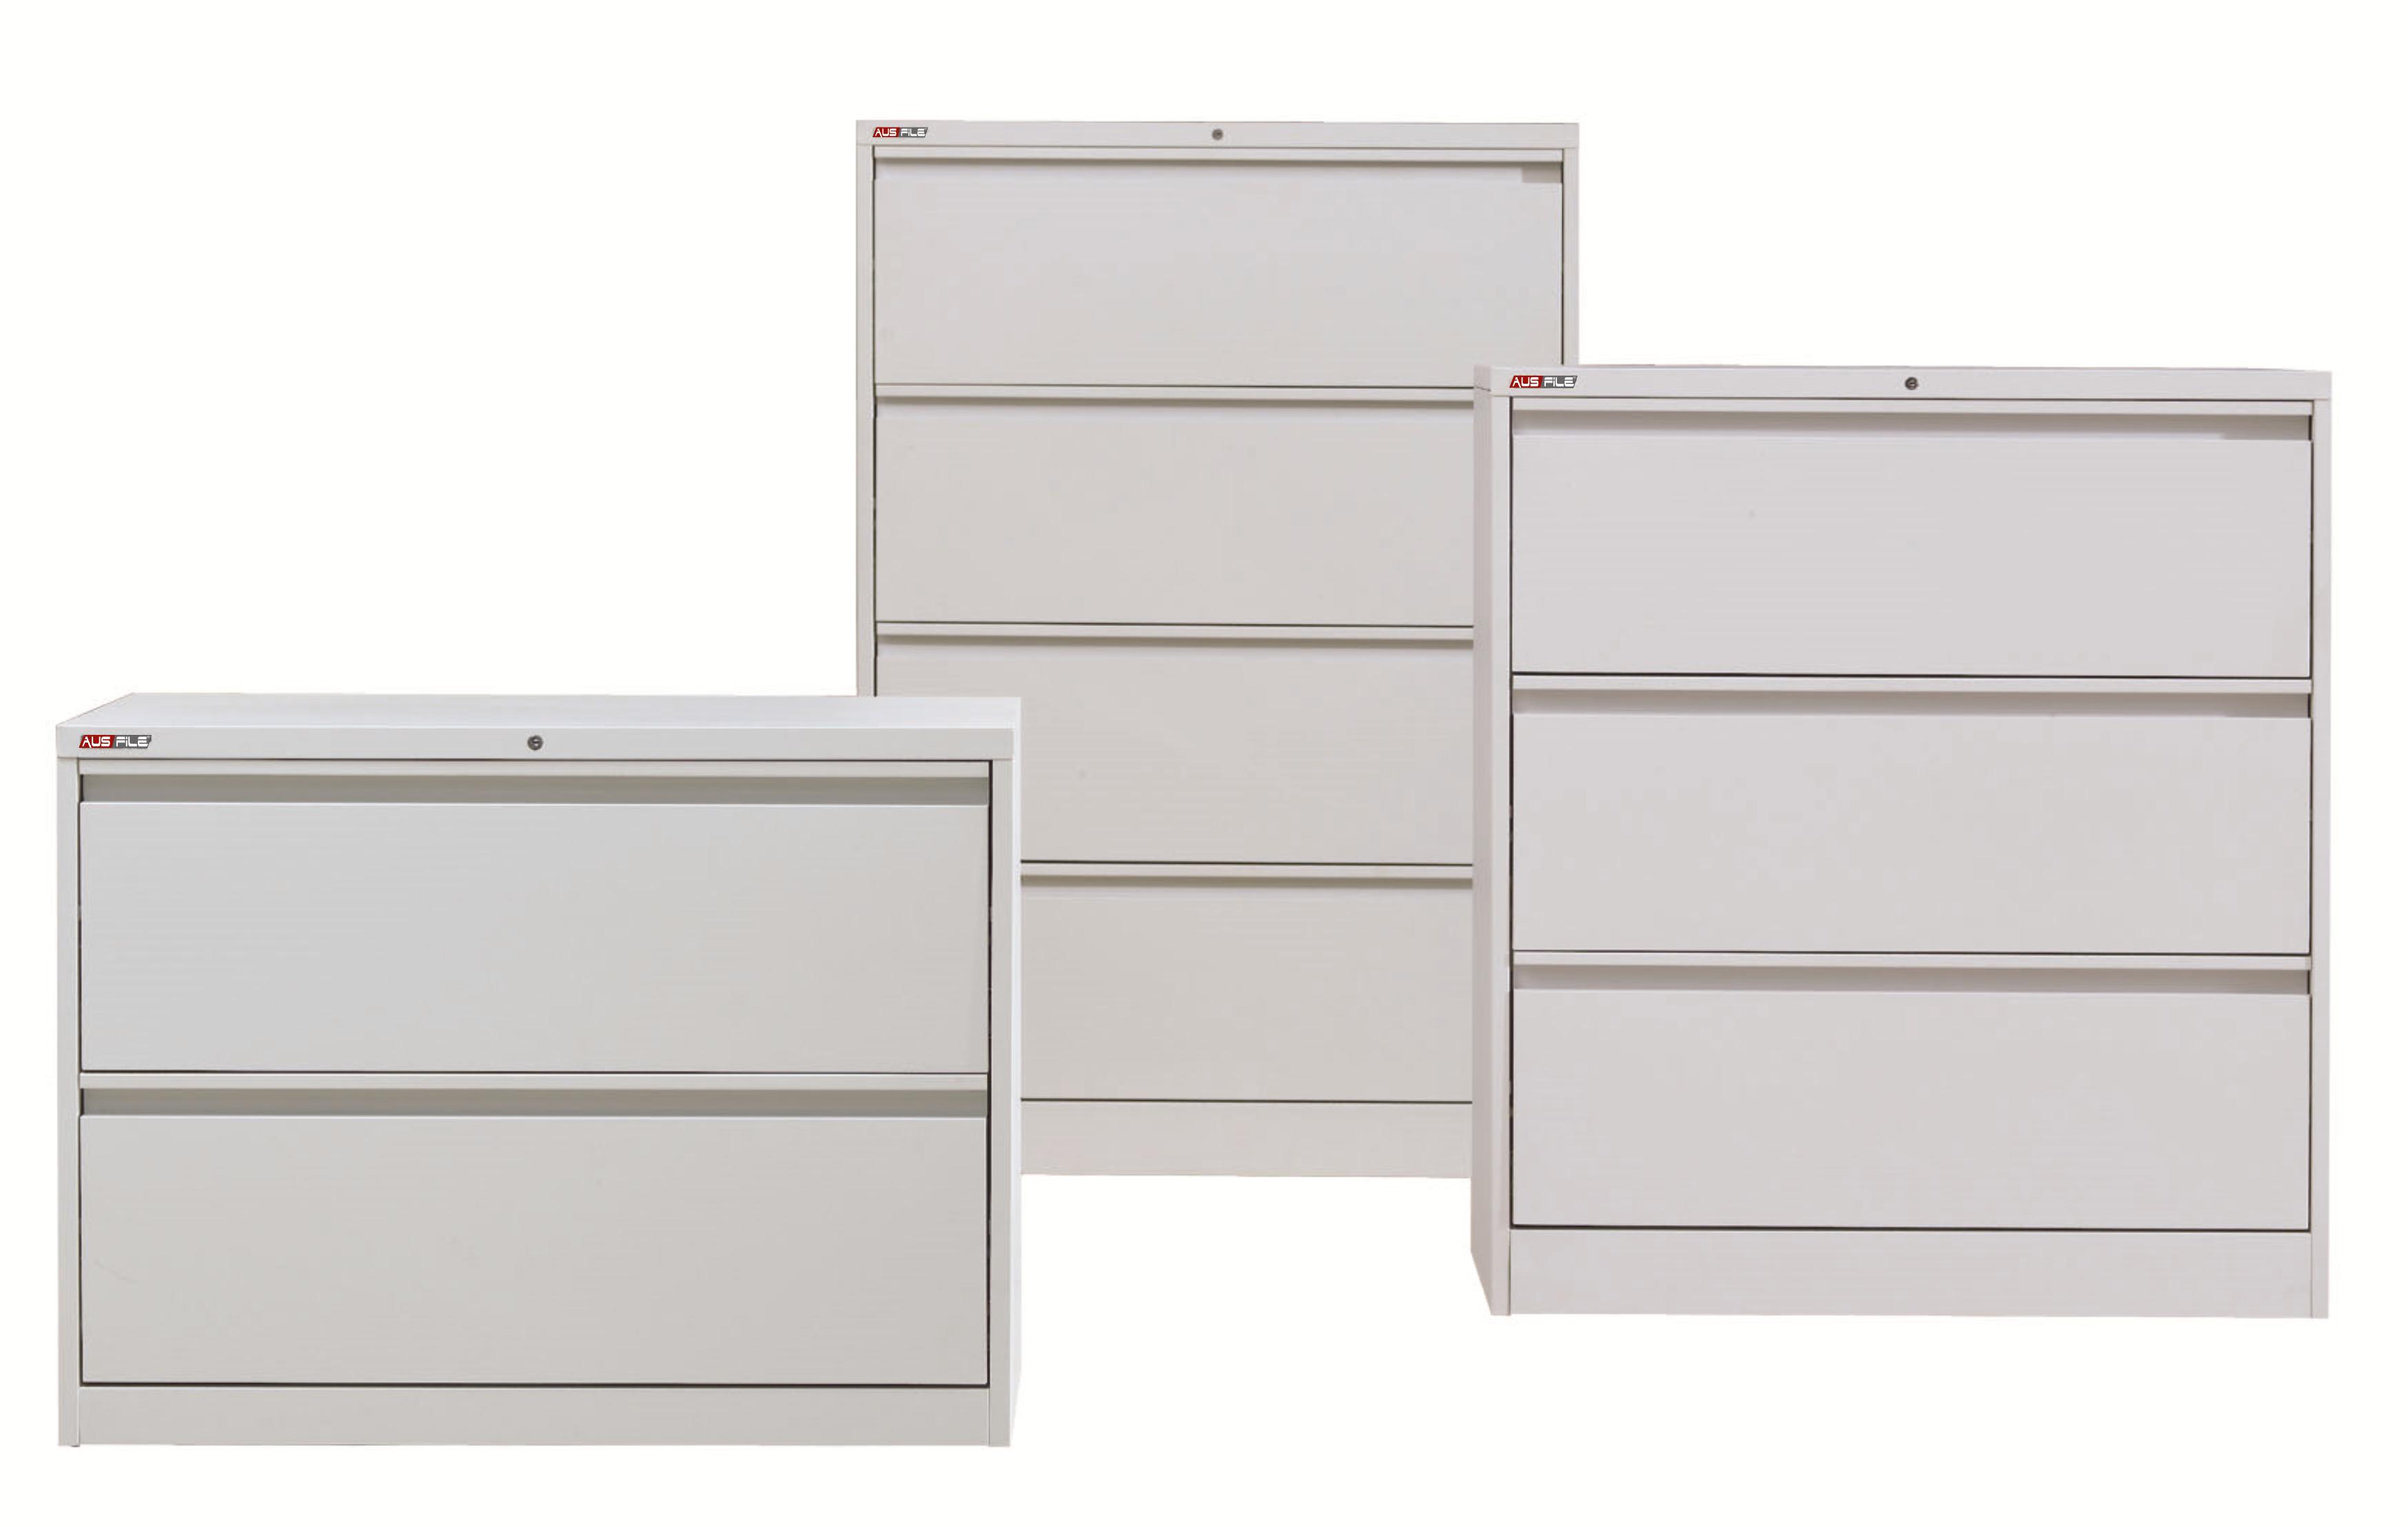 Ausfile Lateral Filing Cabinets Geca